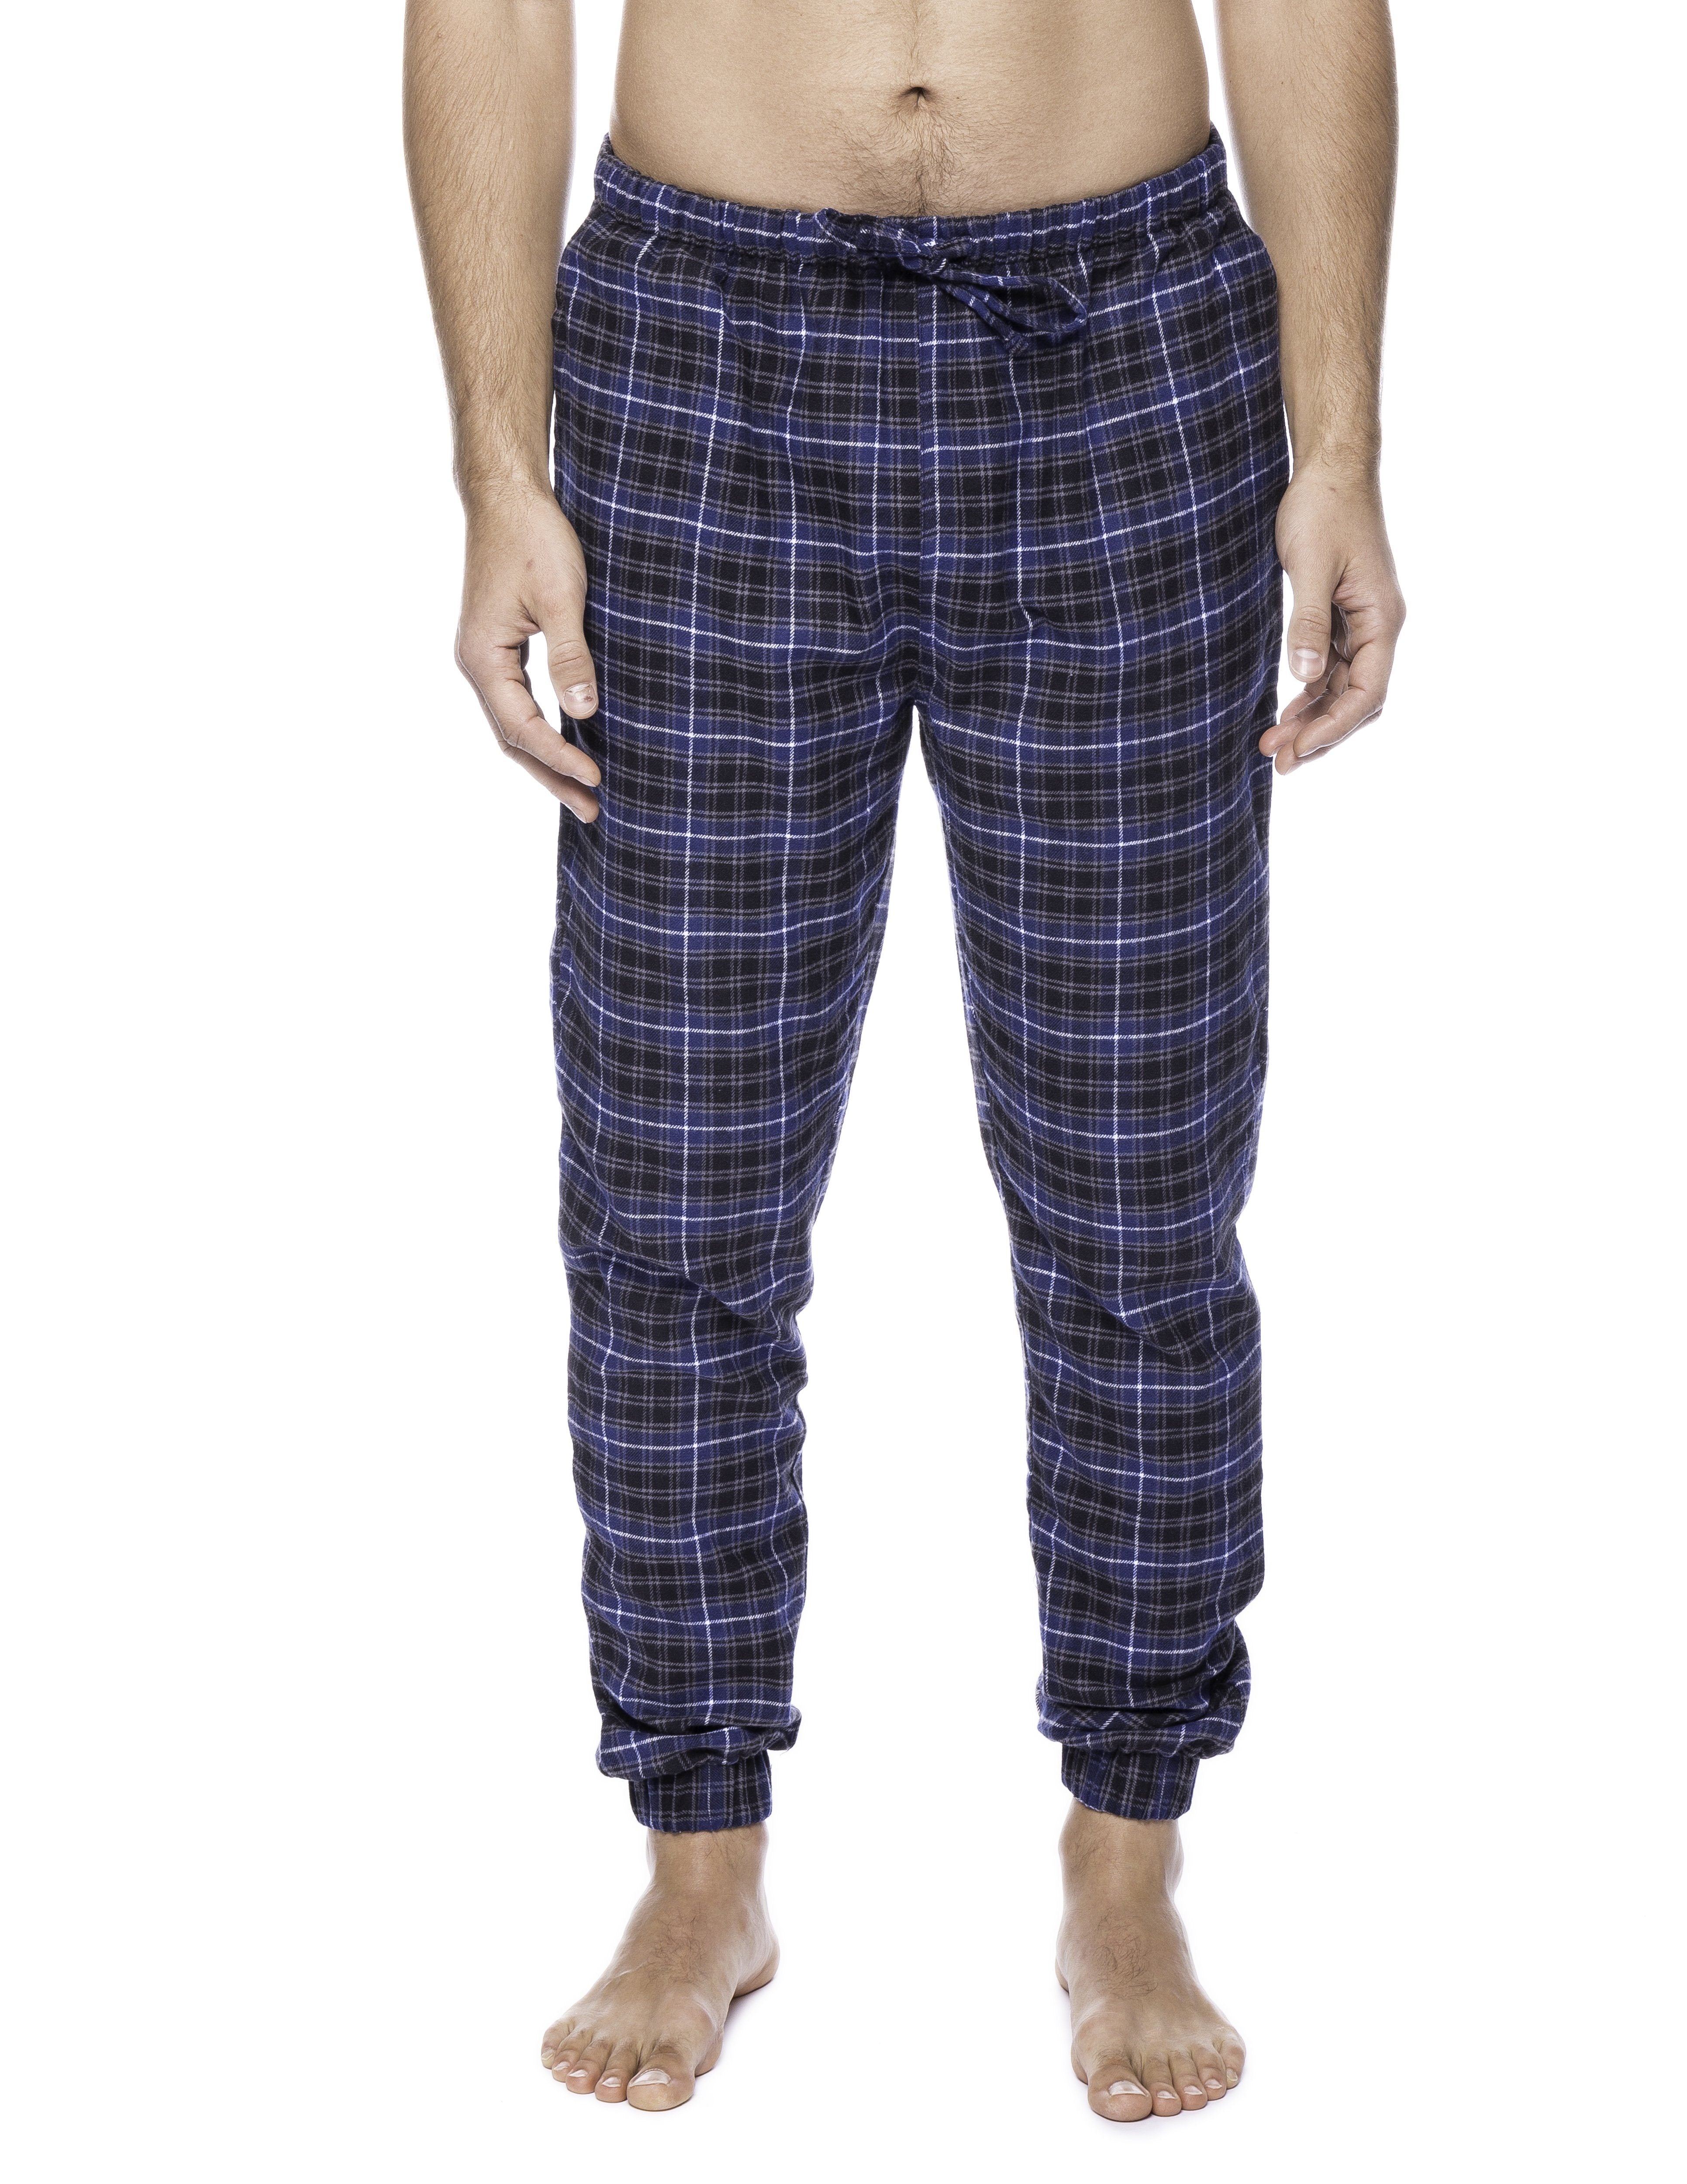 Steel Blue Checkered Flannel Pants For Men - Bombay Trooper